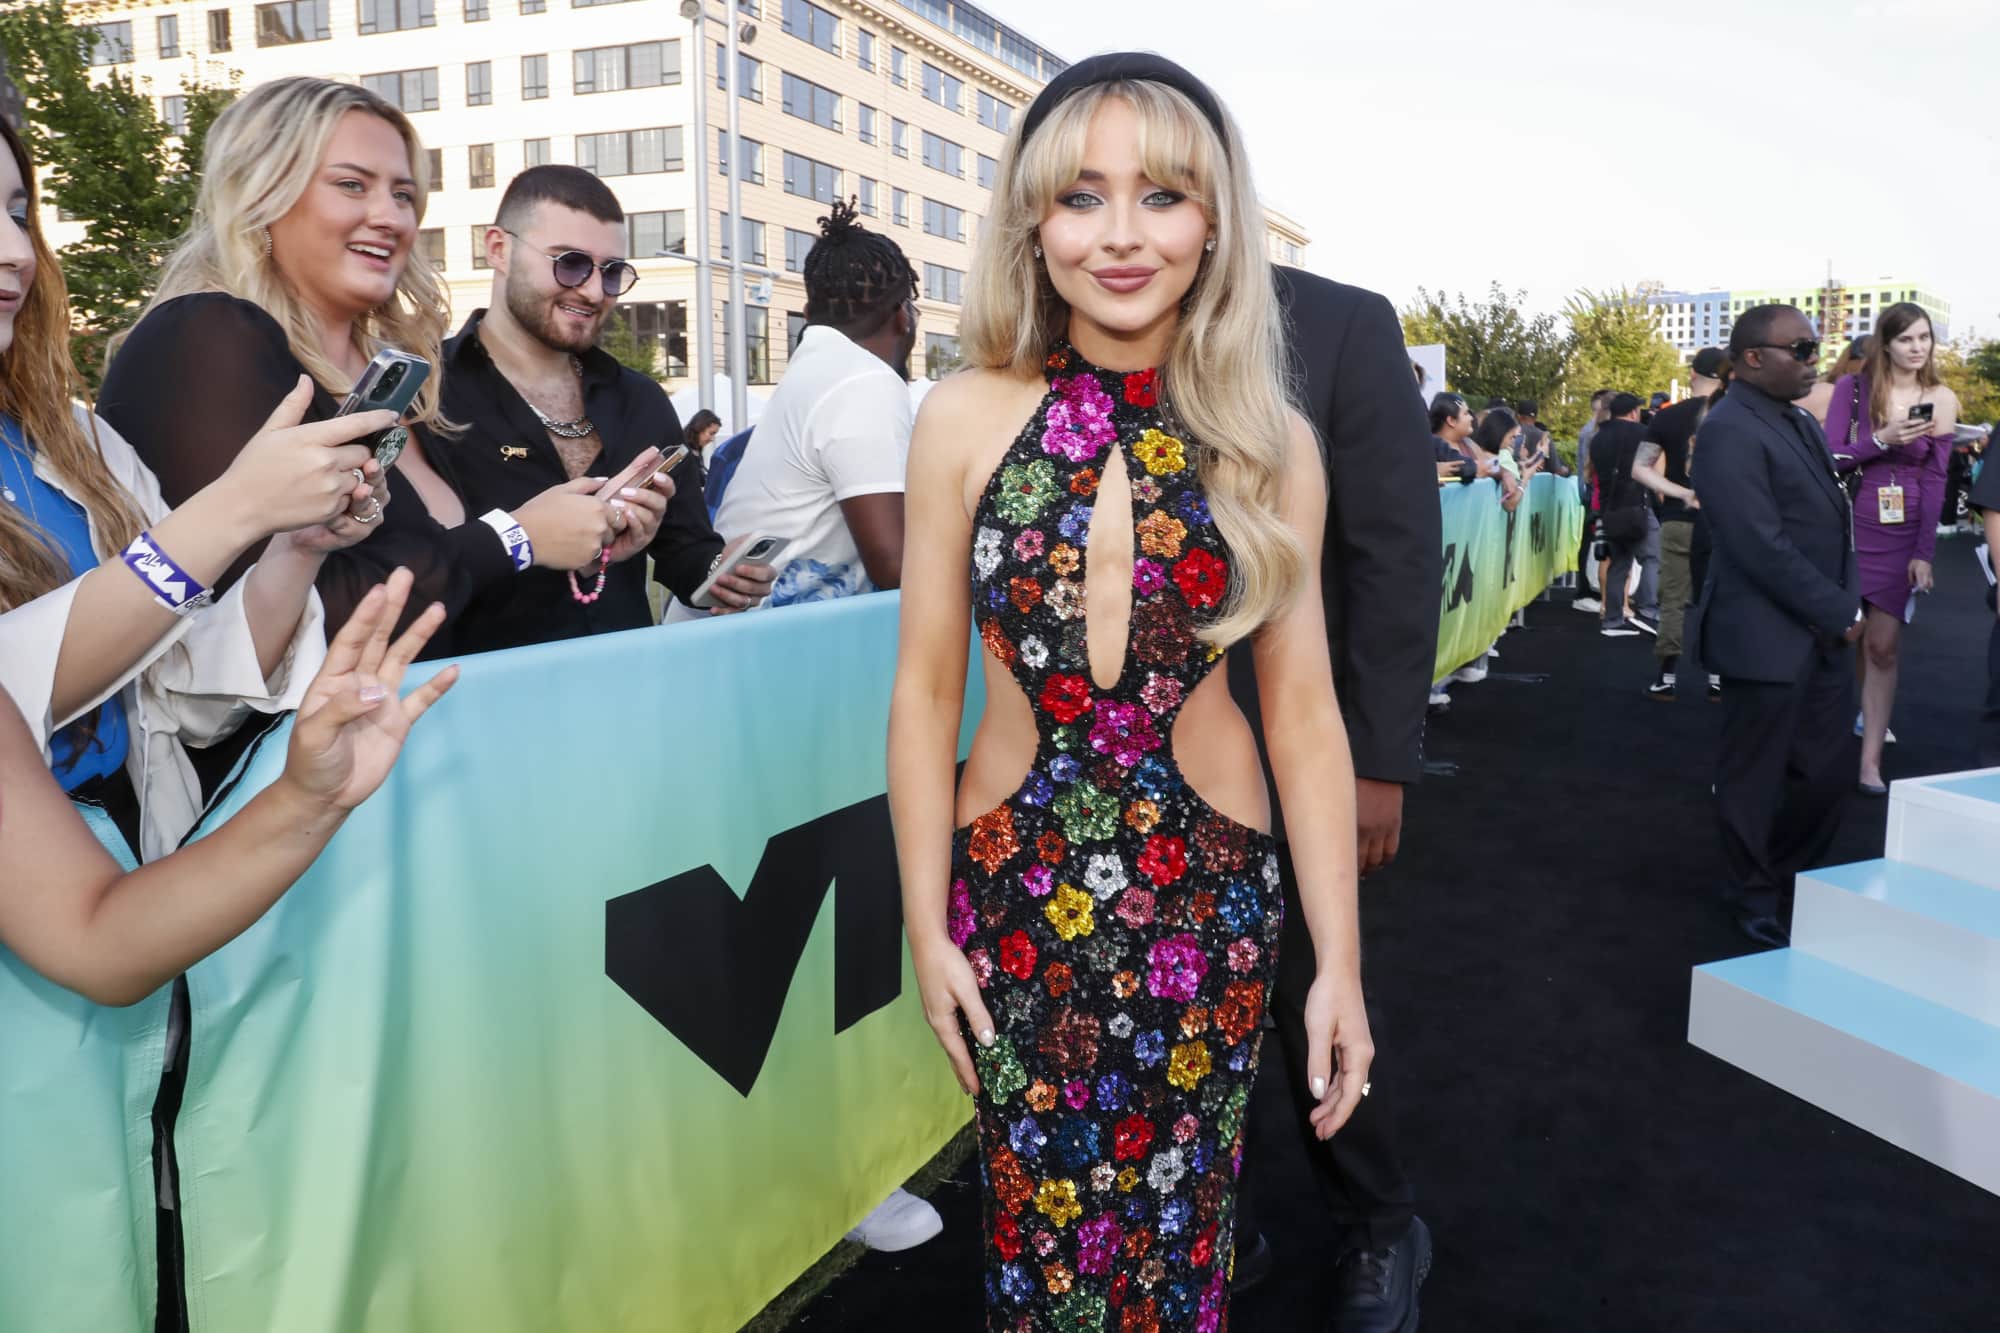 : Sabrina Carpenter attends the 2022 MTV VMAs at Prudential Center on August 28, 2022 in Newark, New Jersey. (Photo by Dia Dipasupil/Getty Images)